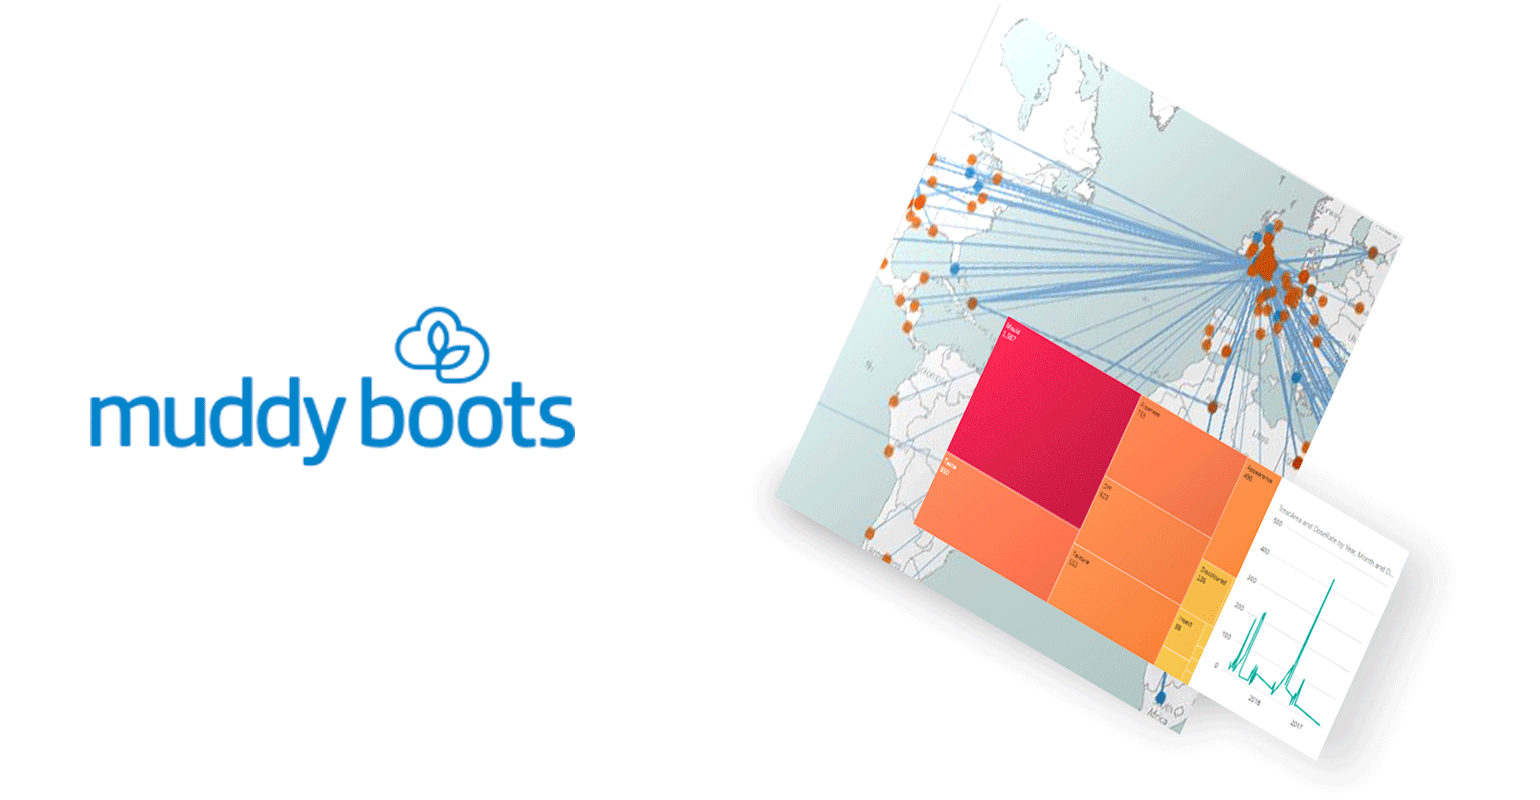 Image showing Muddy Boots logo and software.